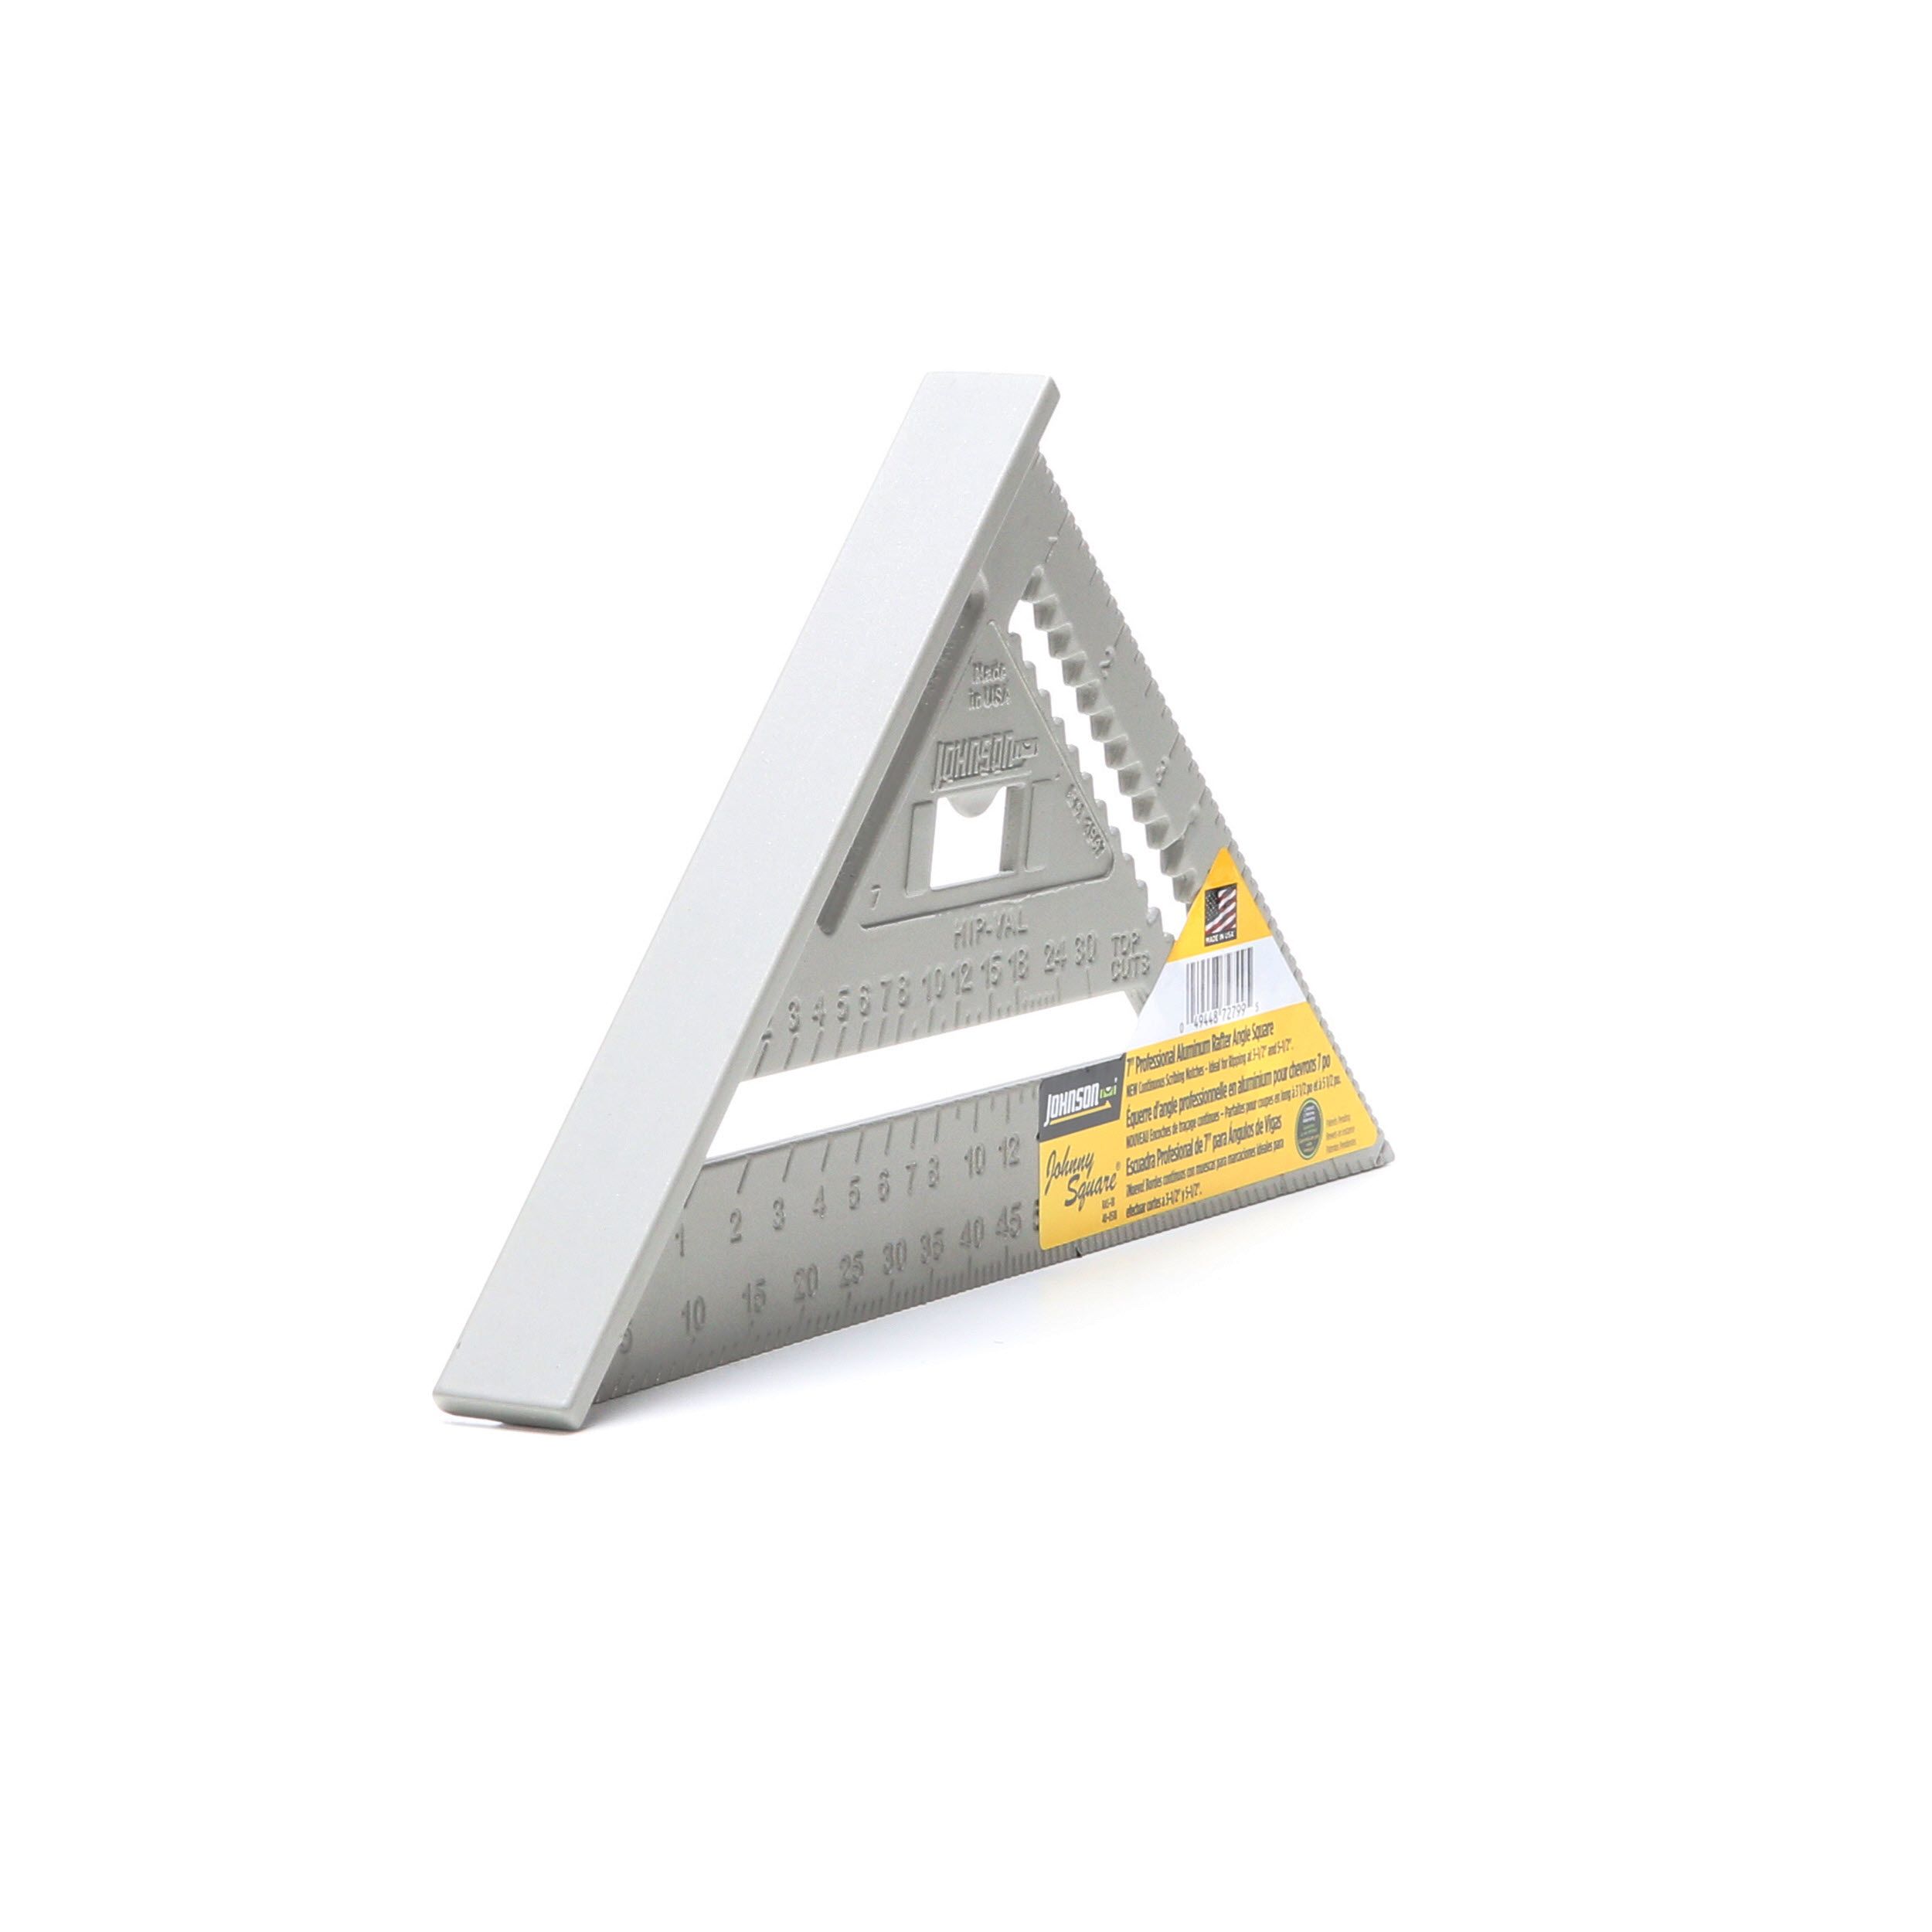 New Details about   MAYES 11059 7" Professional Series Aluminum Rafter Angle Square 